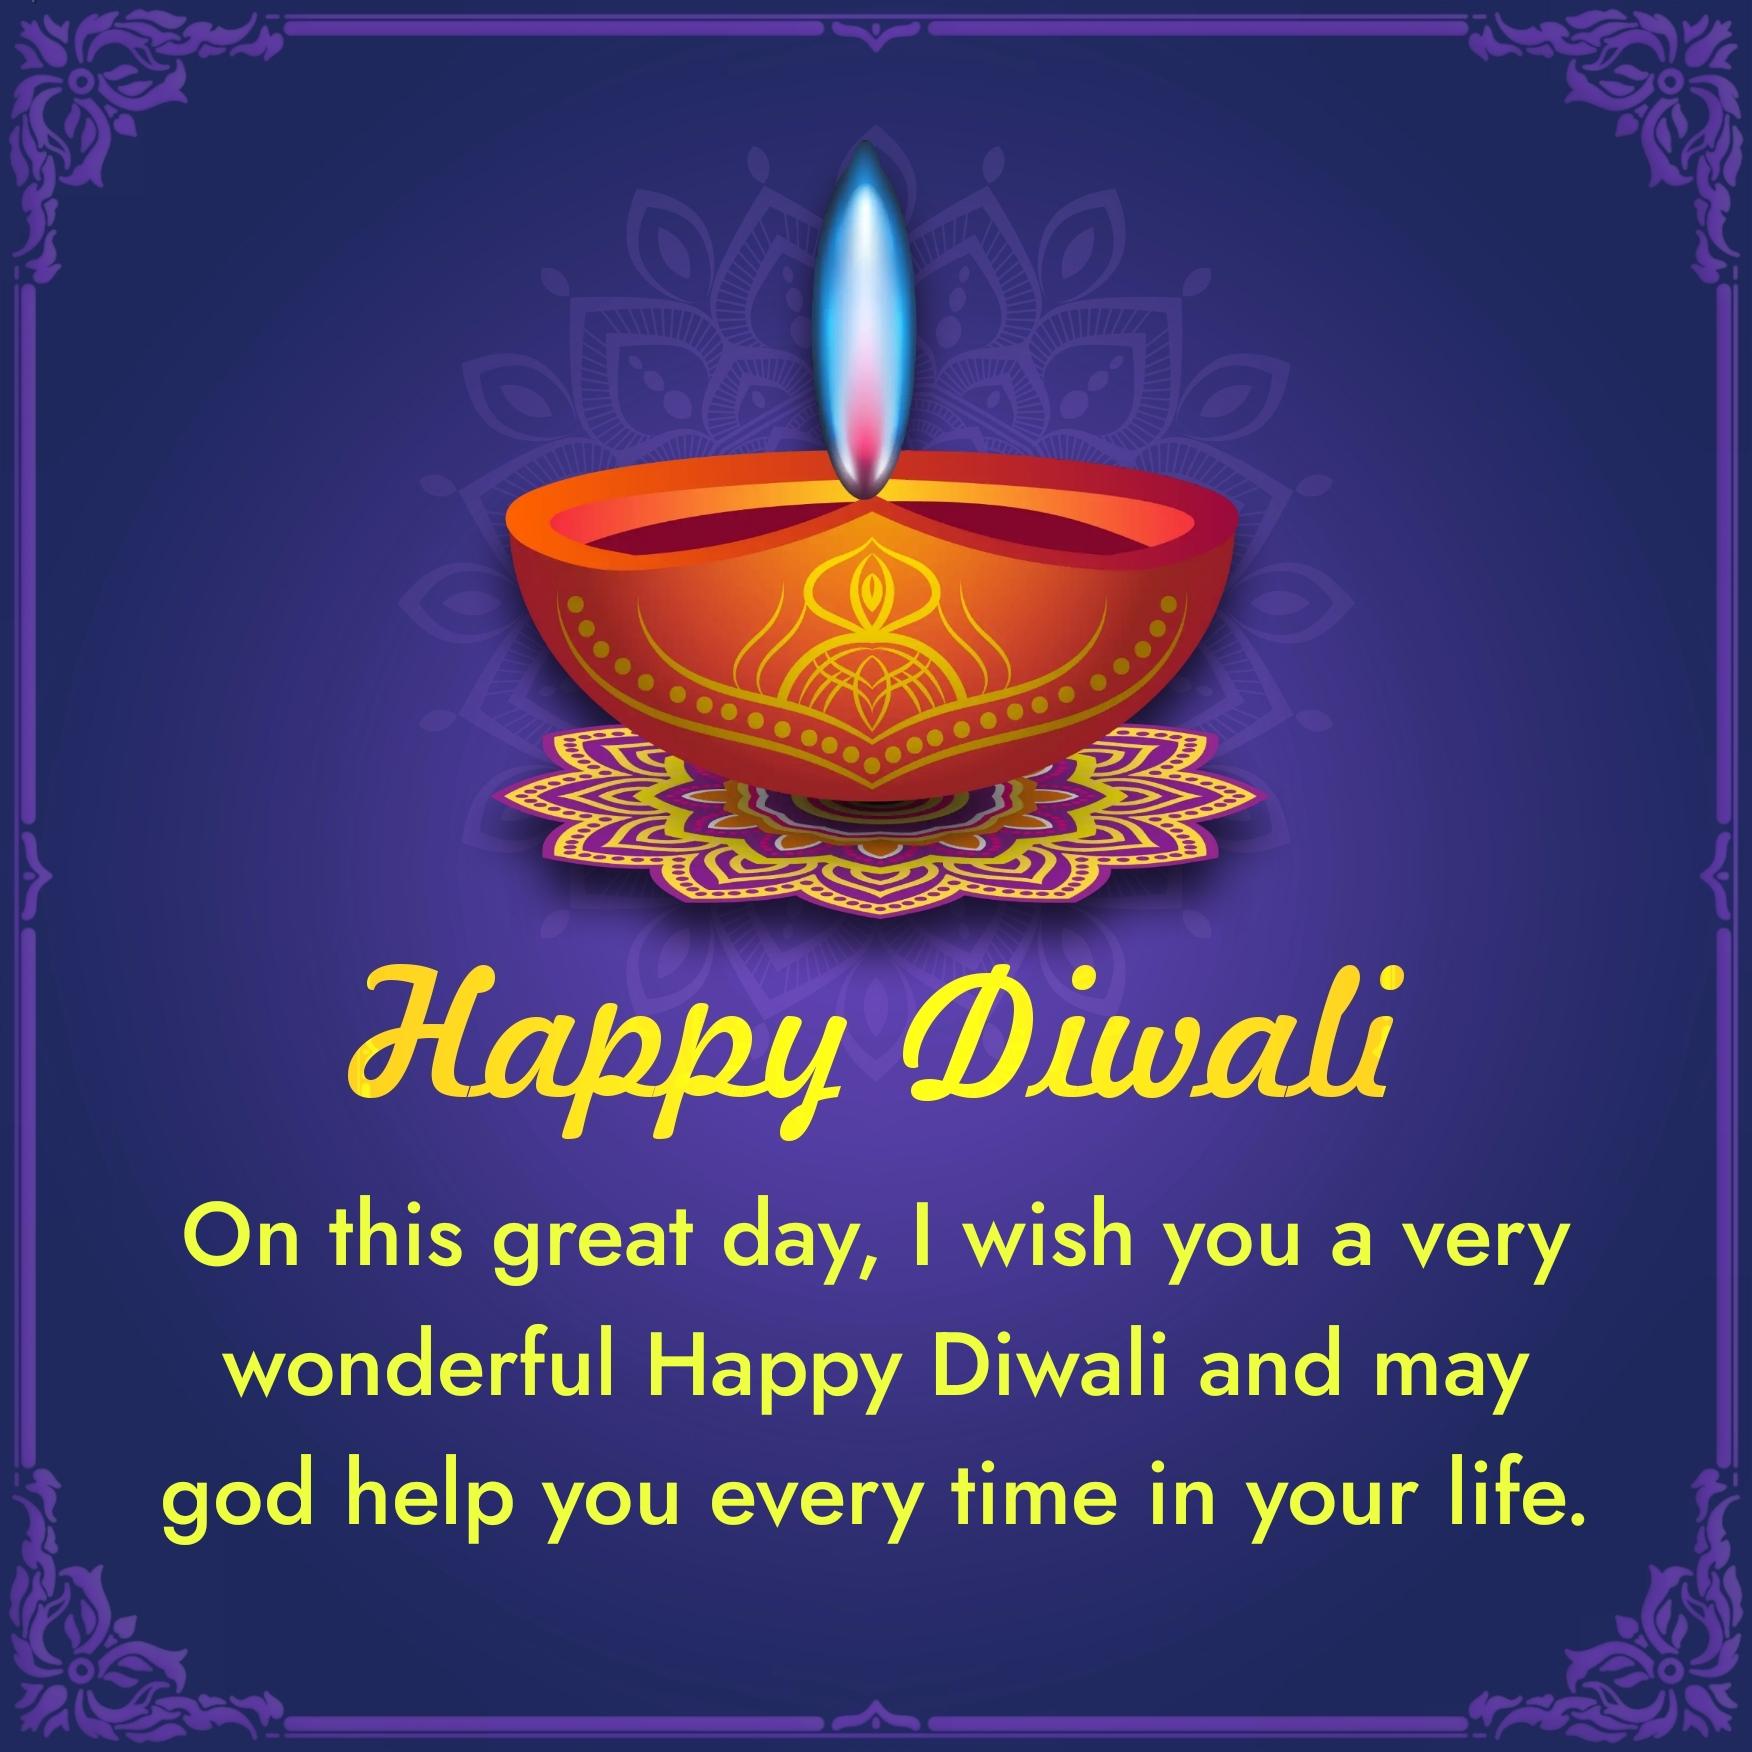 On this great day I wish you a very wonderful Happy Diwali